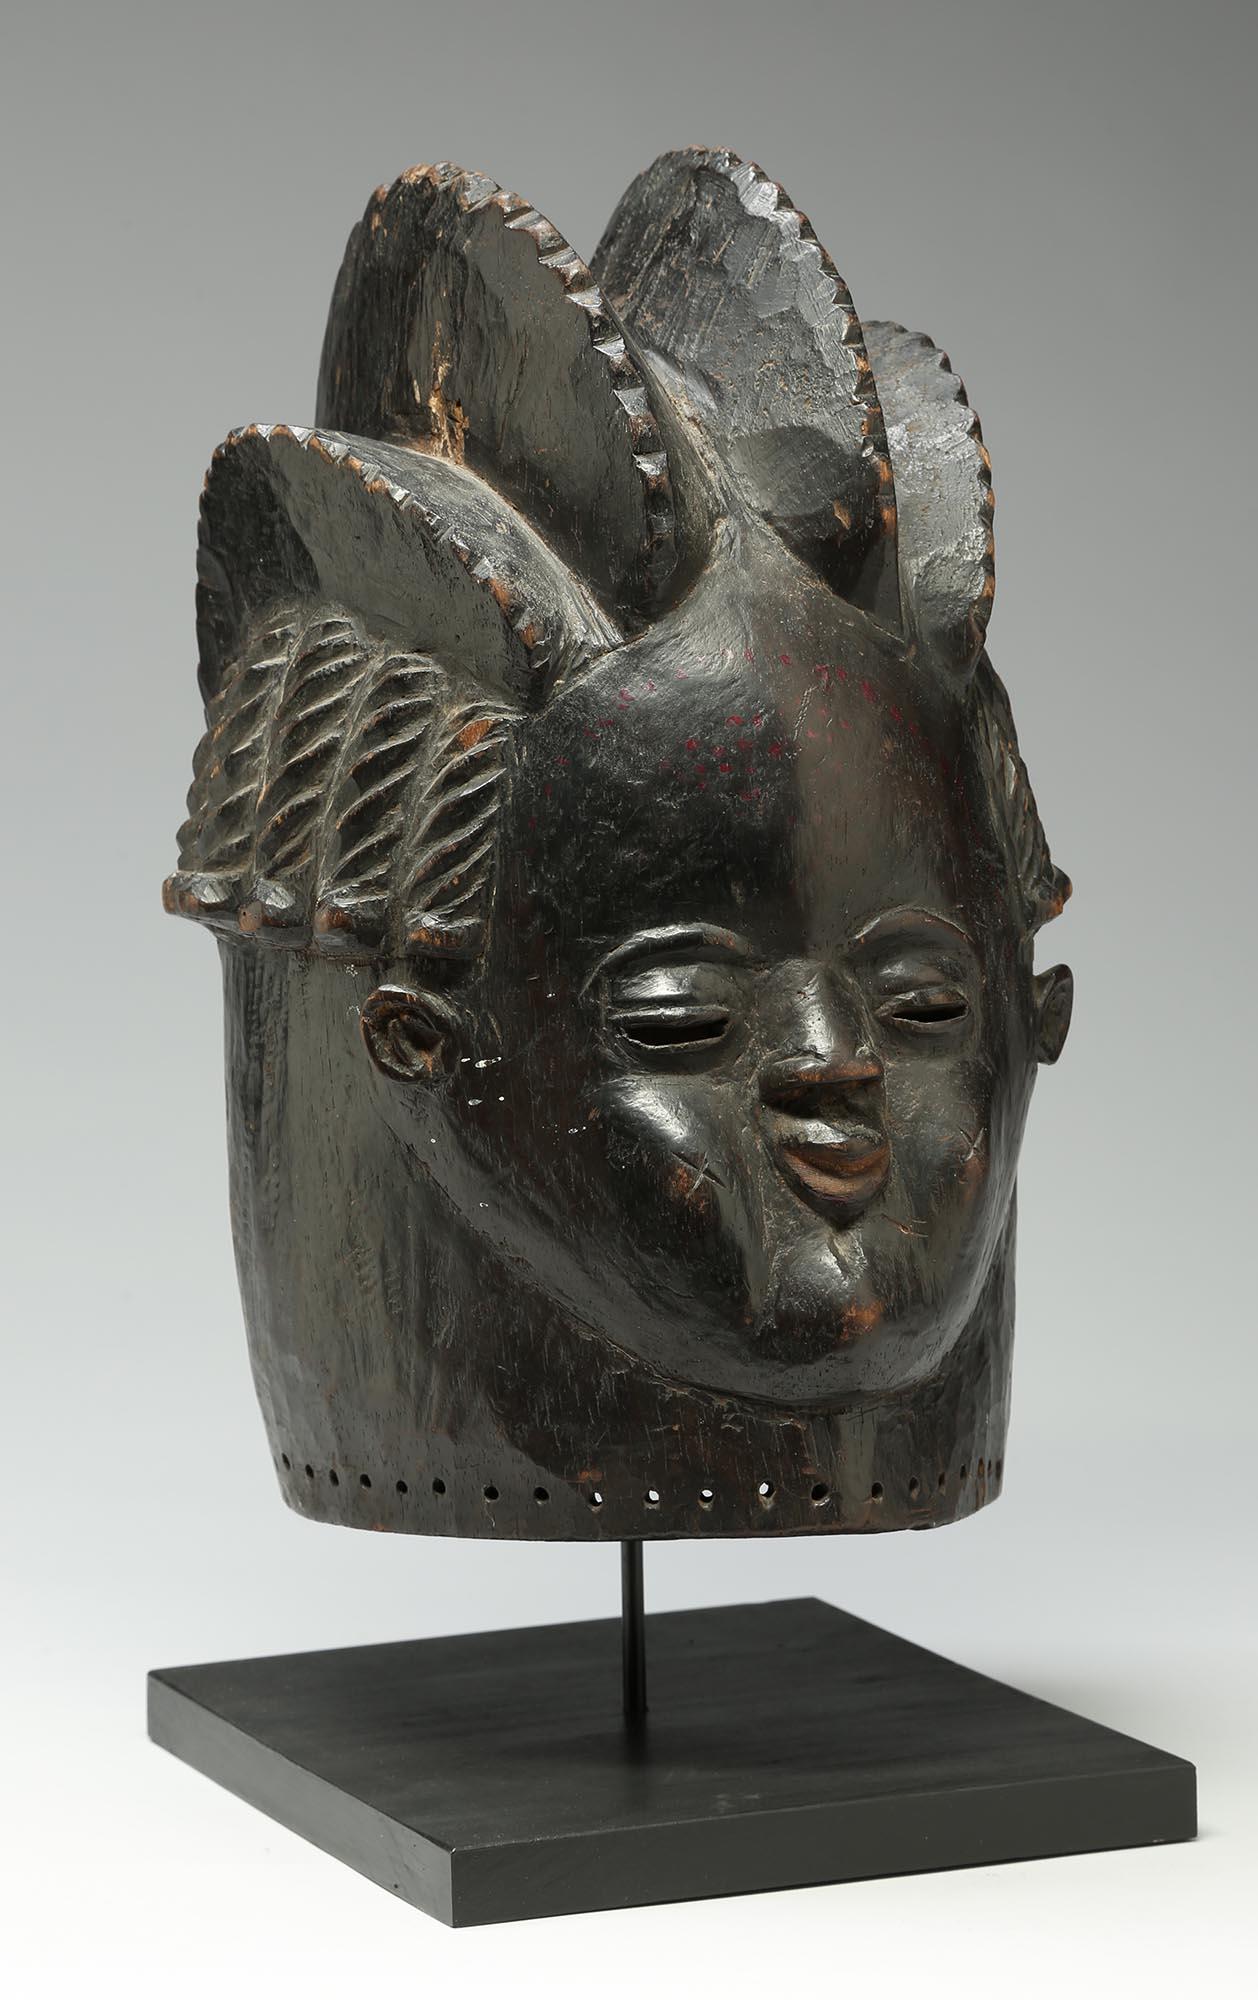 Very finely carved blackened wood helmet mask from the Bassa people in Liberia. Early 20th century with great crested hairstyle with rows of braids on side of head and welcoming face. On custom wood and metal stand, mask 14 3/4 inches high, on base